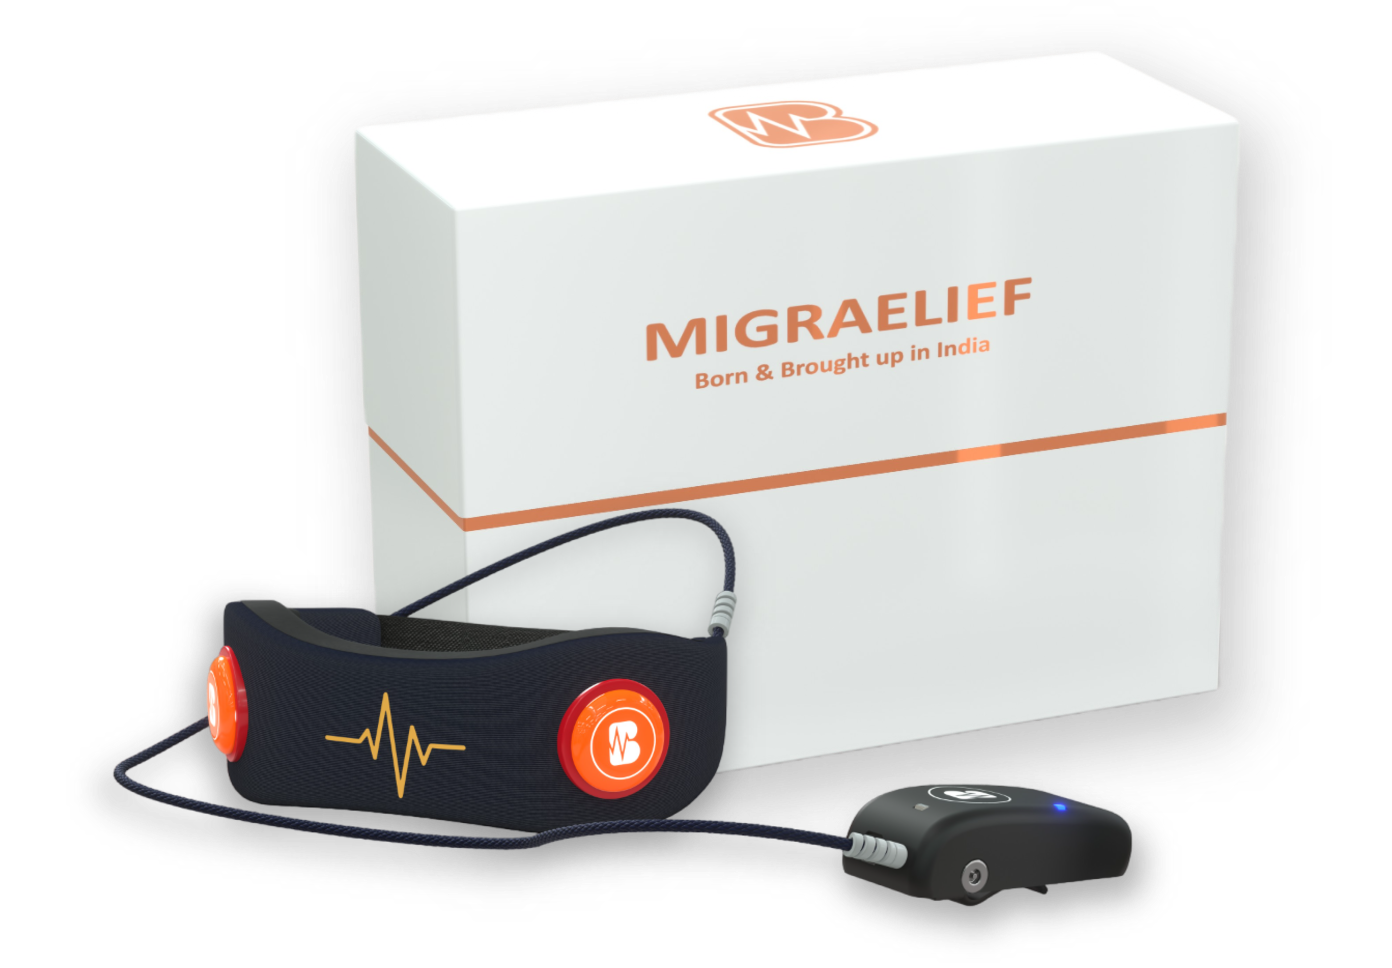 Migraelief - instant migraine relief product for home, trusted by doctors. a product of Bramhansh